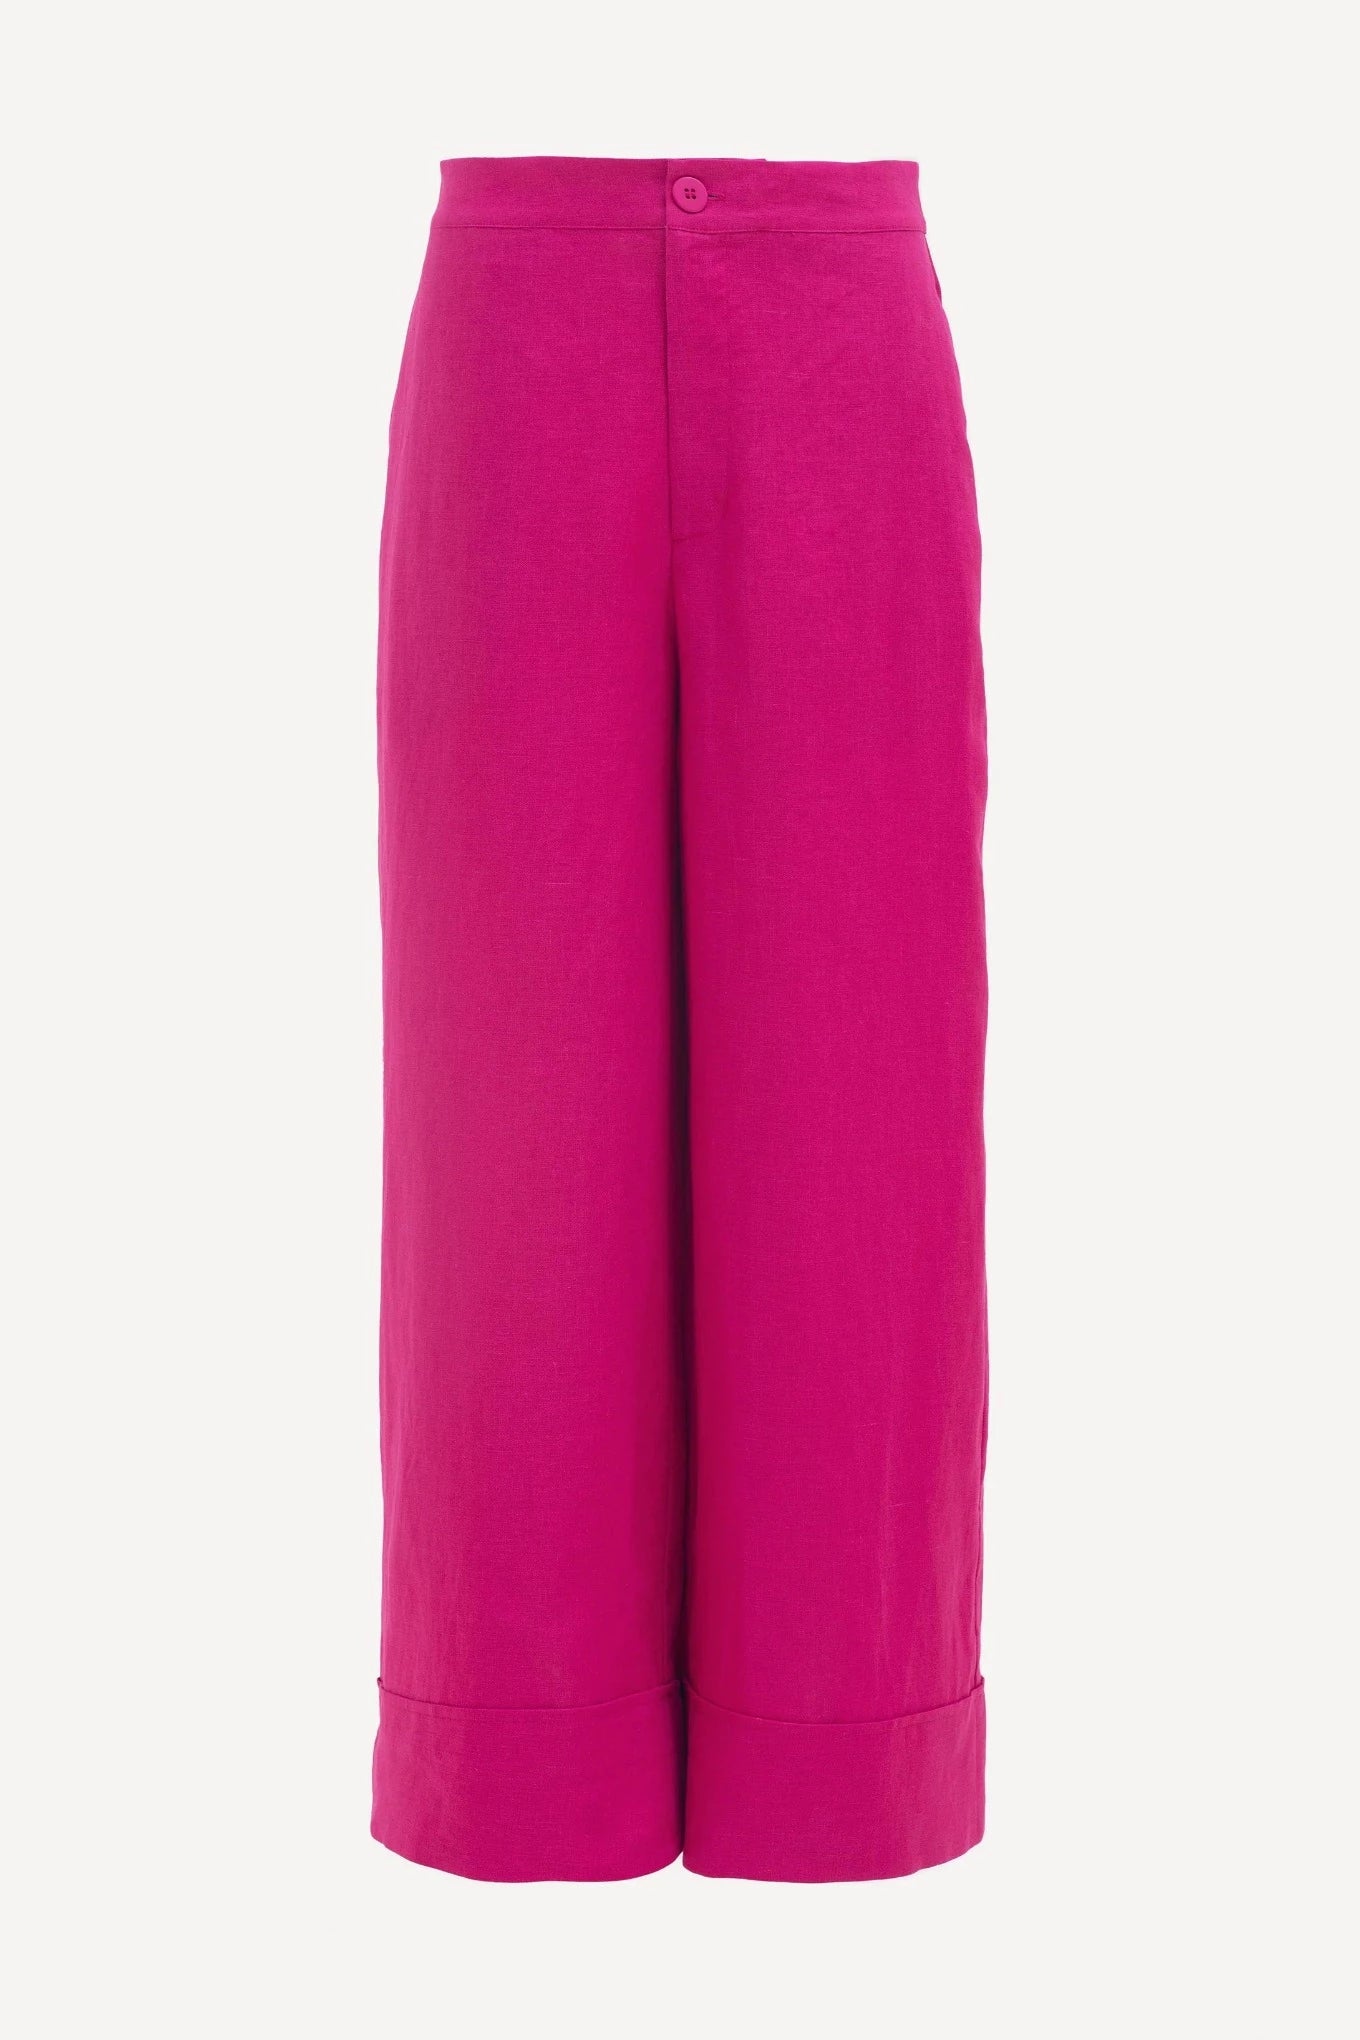 Elk the Label Anneli pants in bright pink French linen.